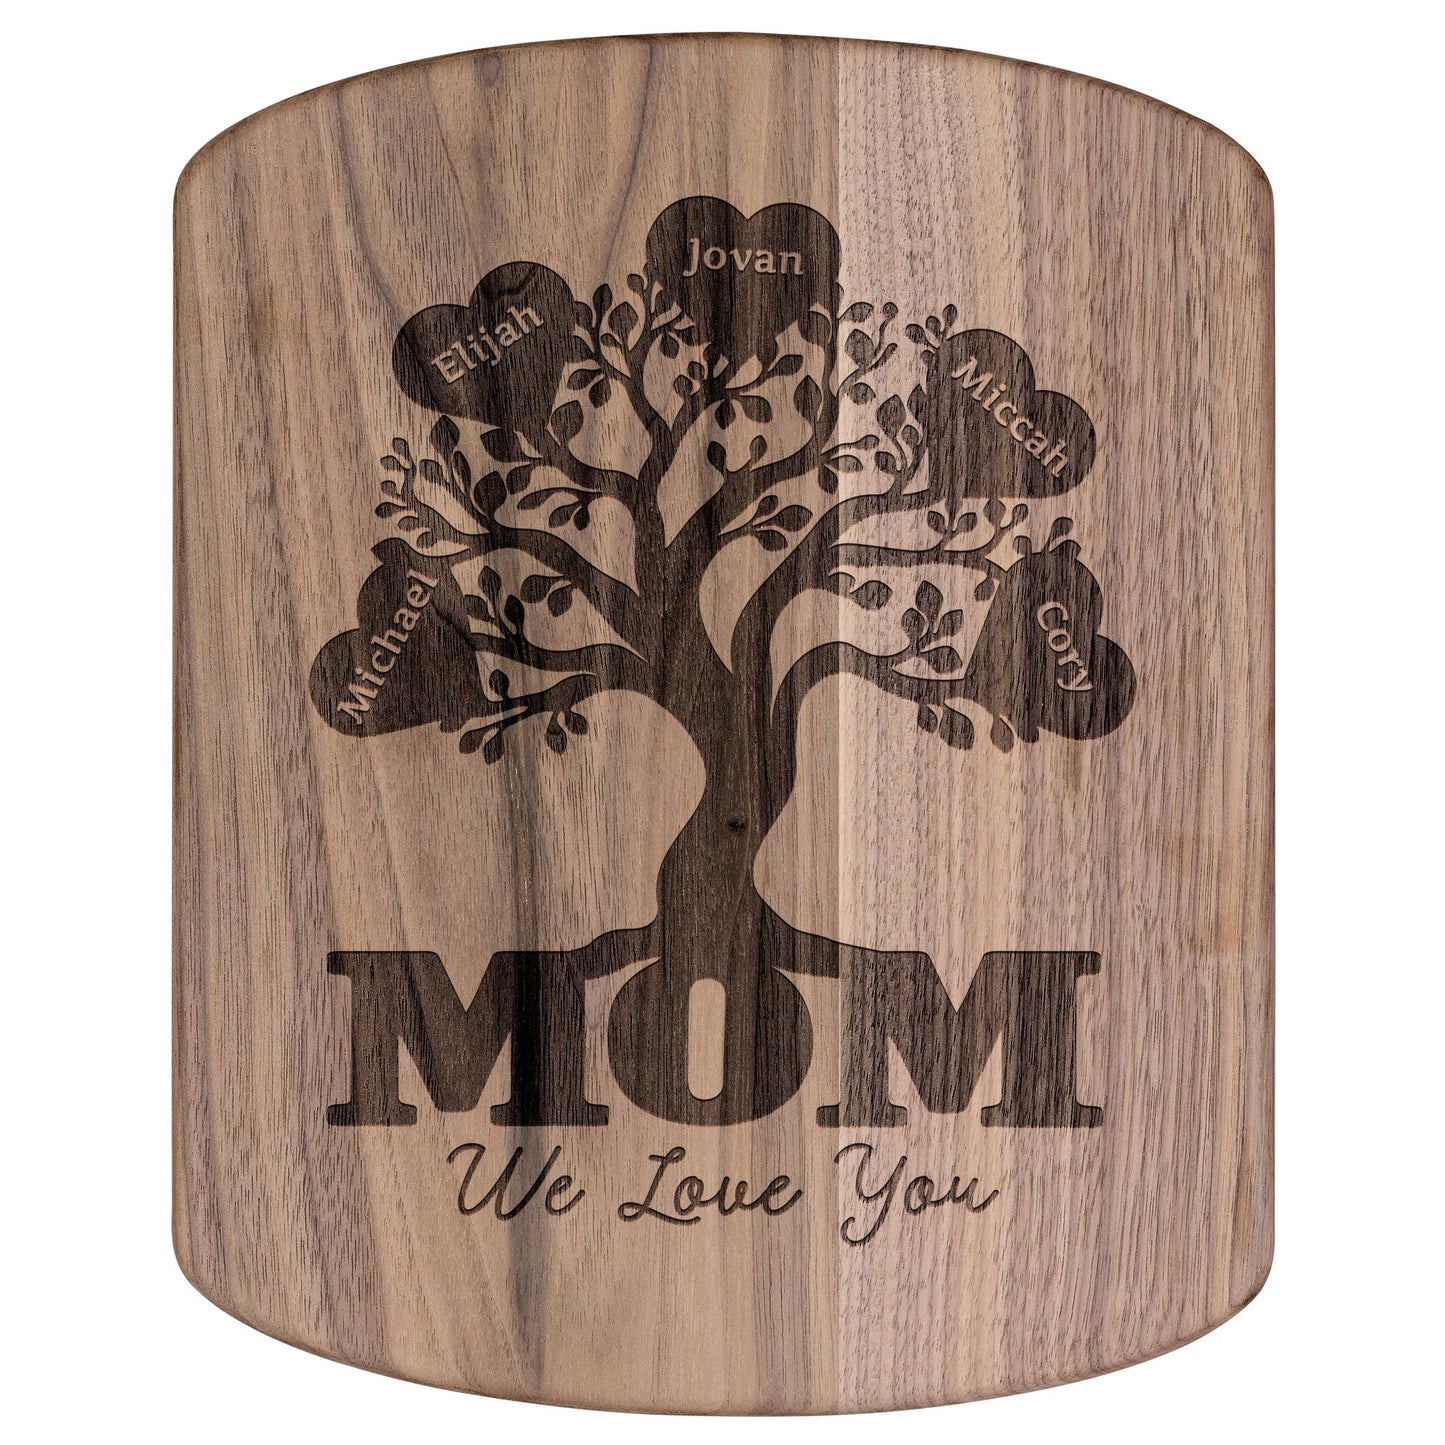 Mom Family Tree Personalized - Hardwood Oval Cutting Board - Get Deerty